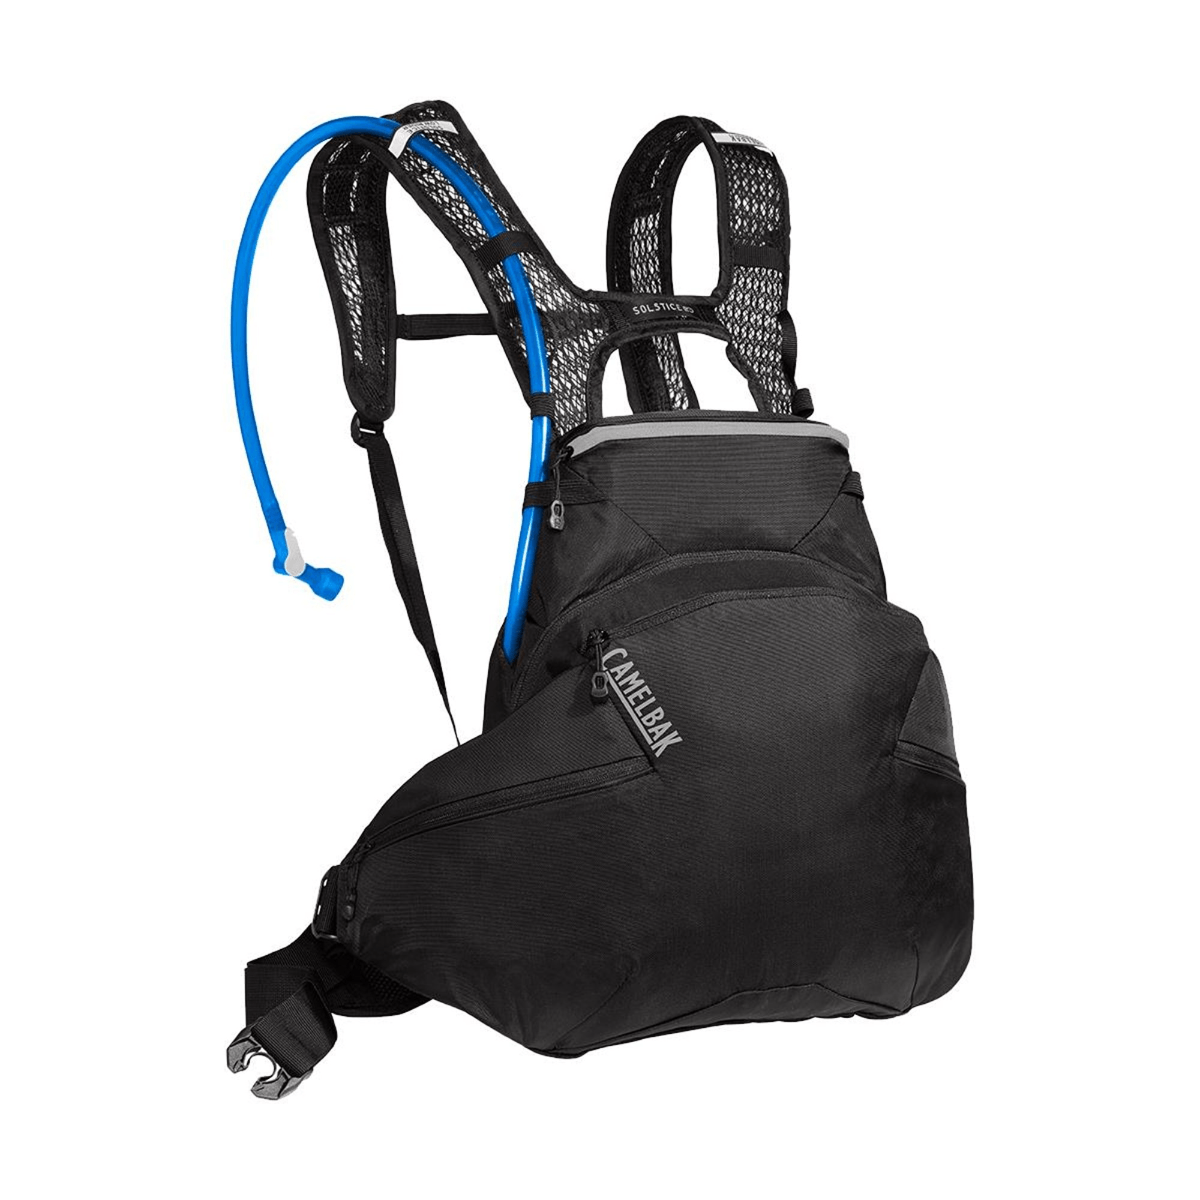 Camelbak Women's Solstice LR 10 Hydration Pack (Gunmetal or Black) $40 at Al's Sporting Goods & More w/ Free S&H on $50+